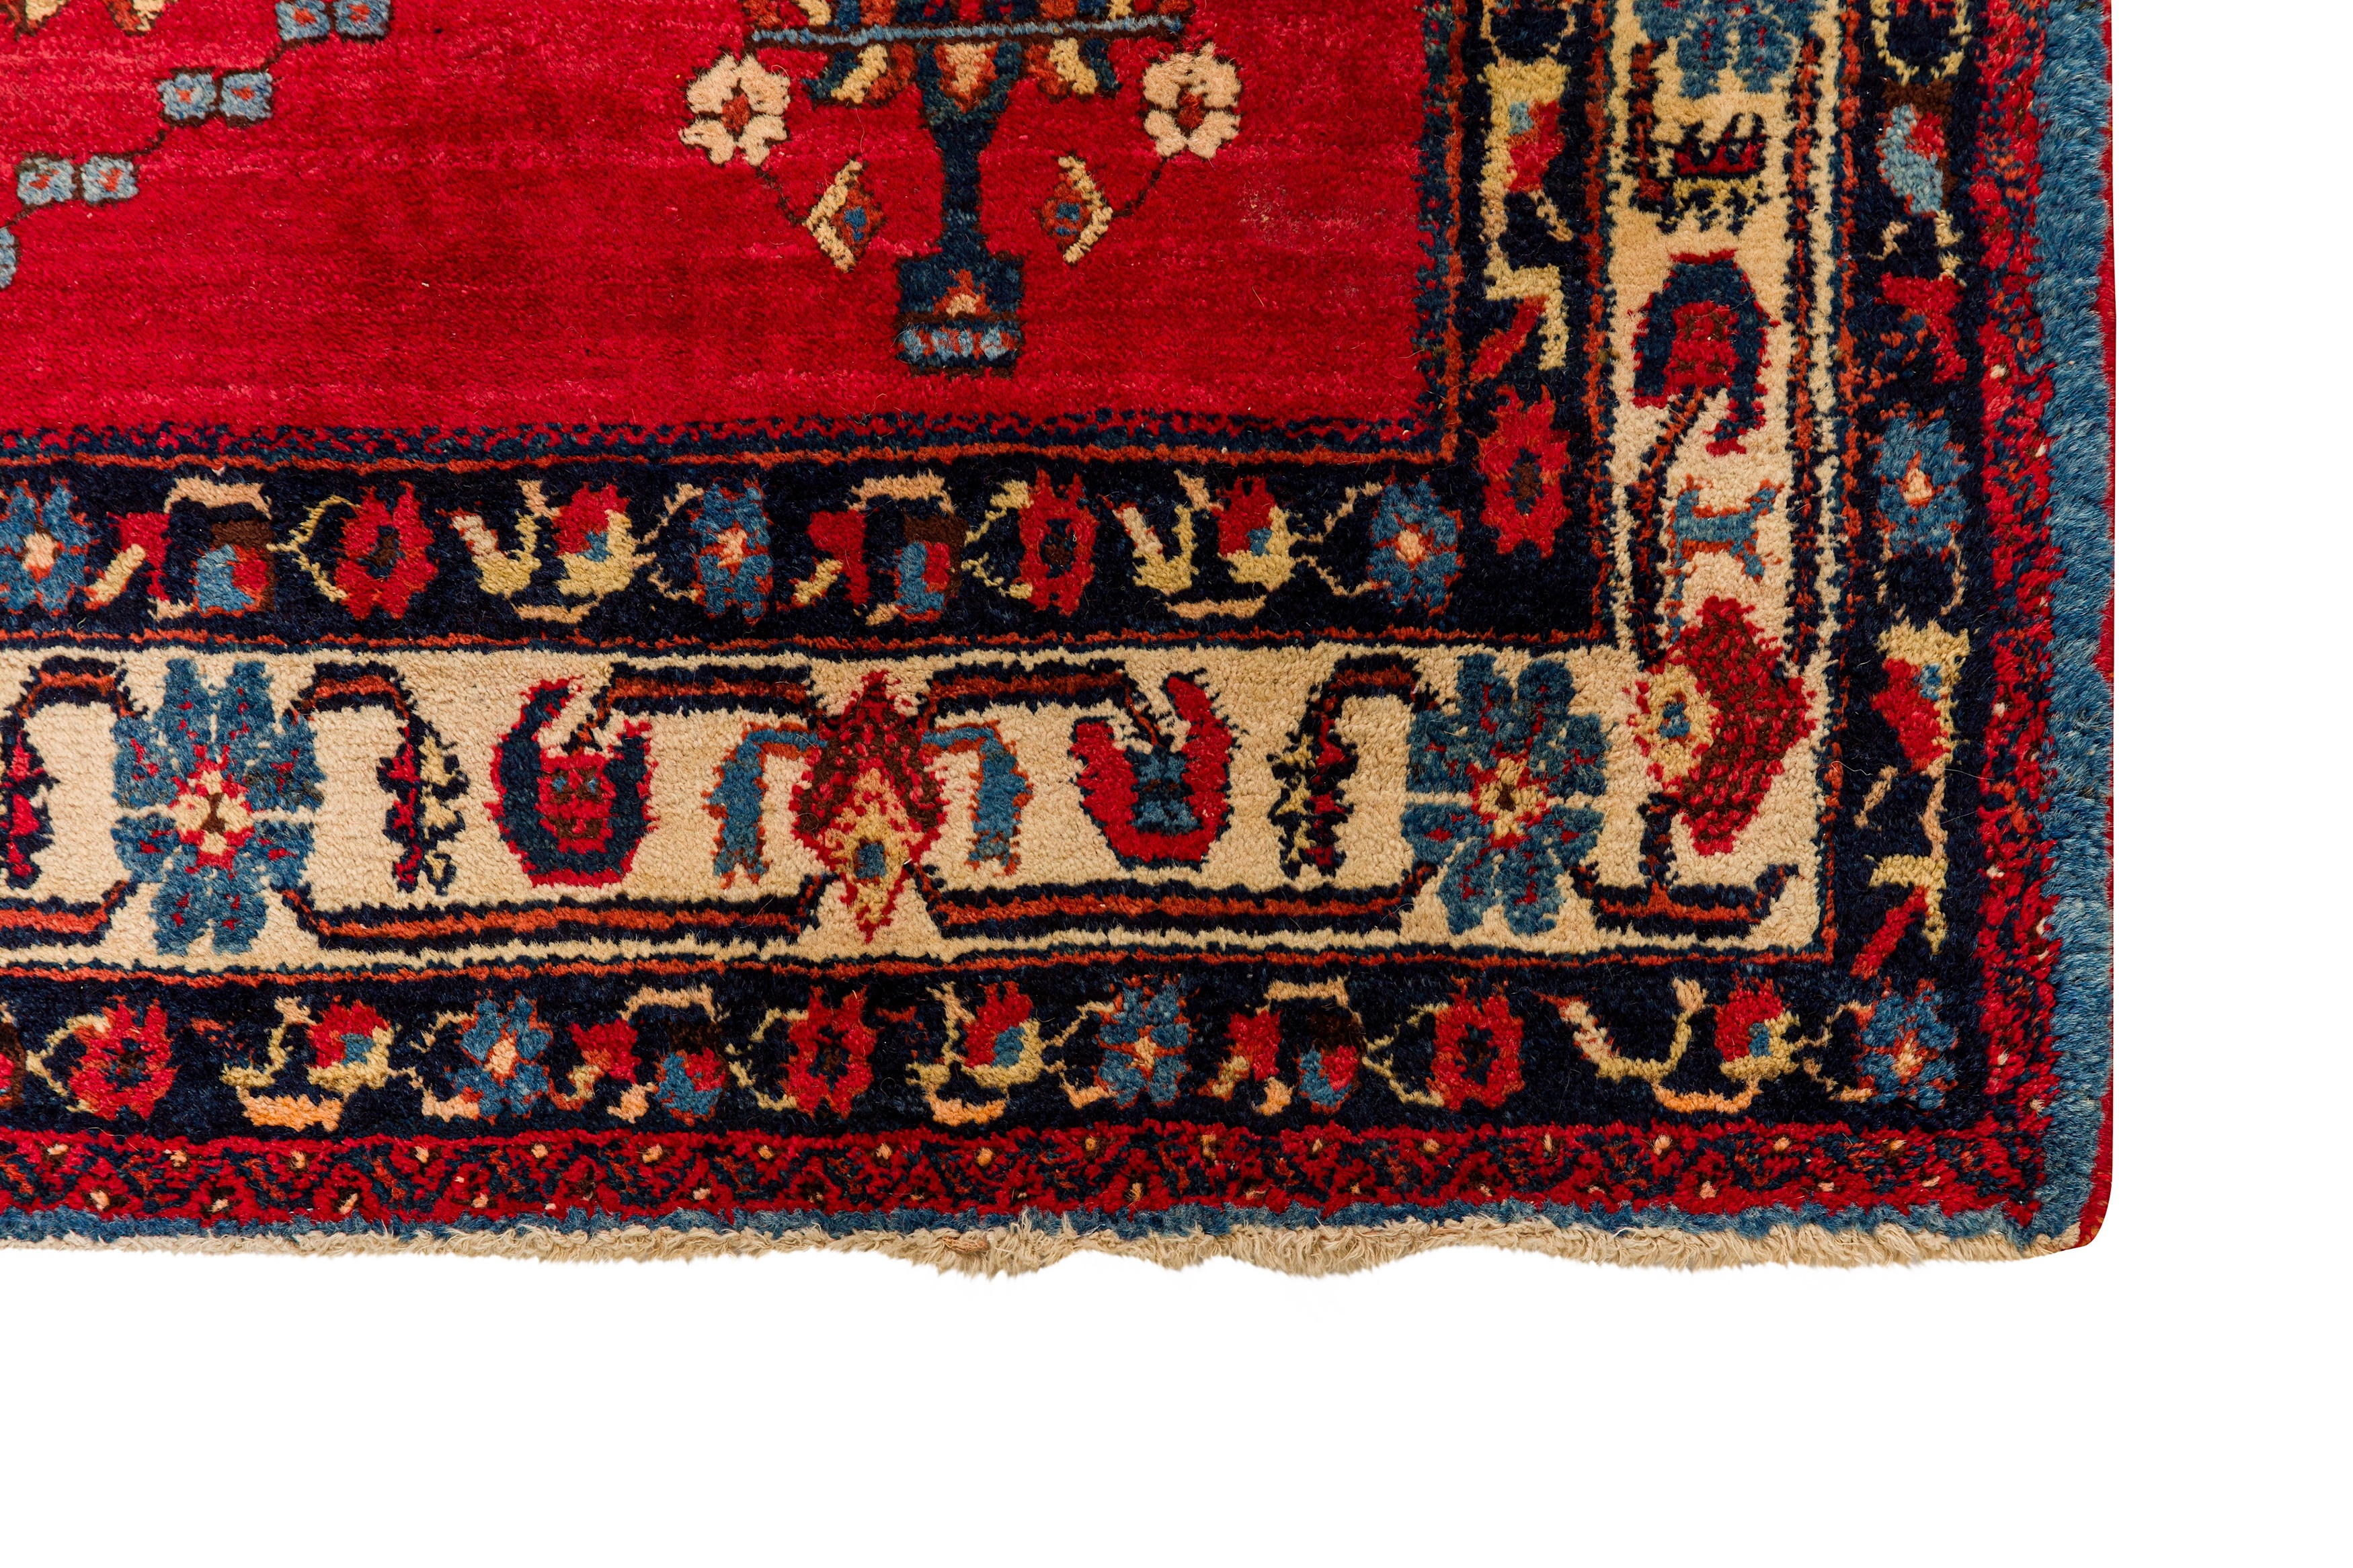 A FINE AFSHAR RUG, SOUTH-WEST PERSIA - Image 7 of 8